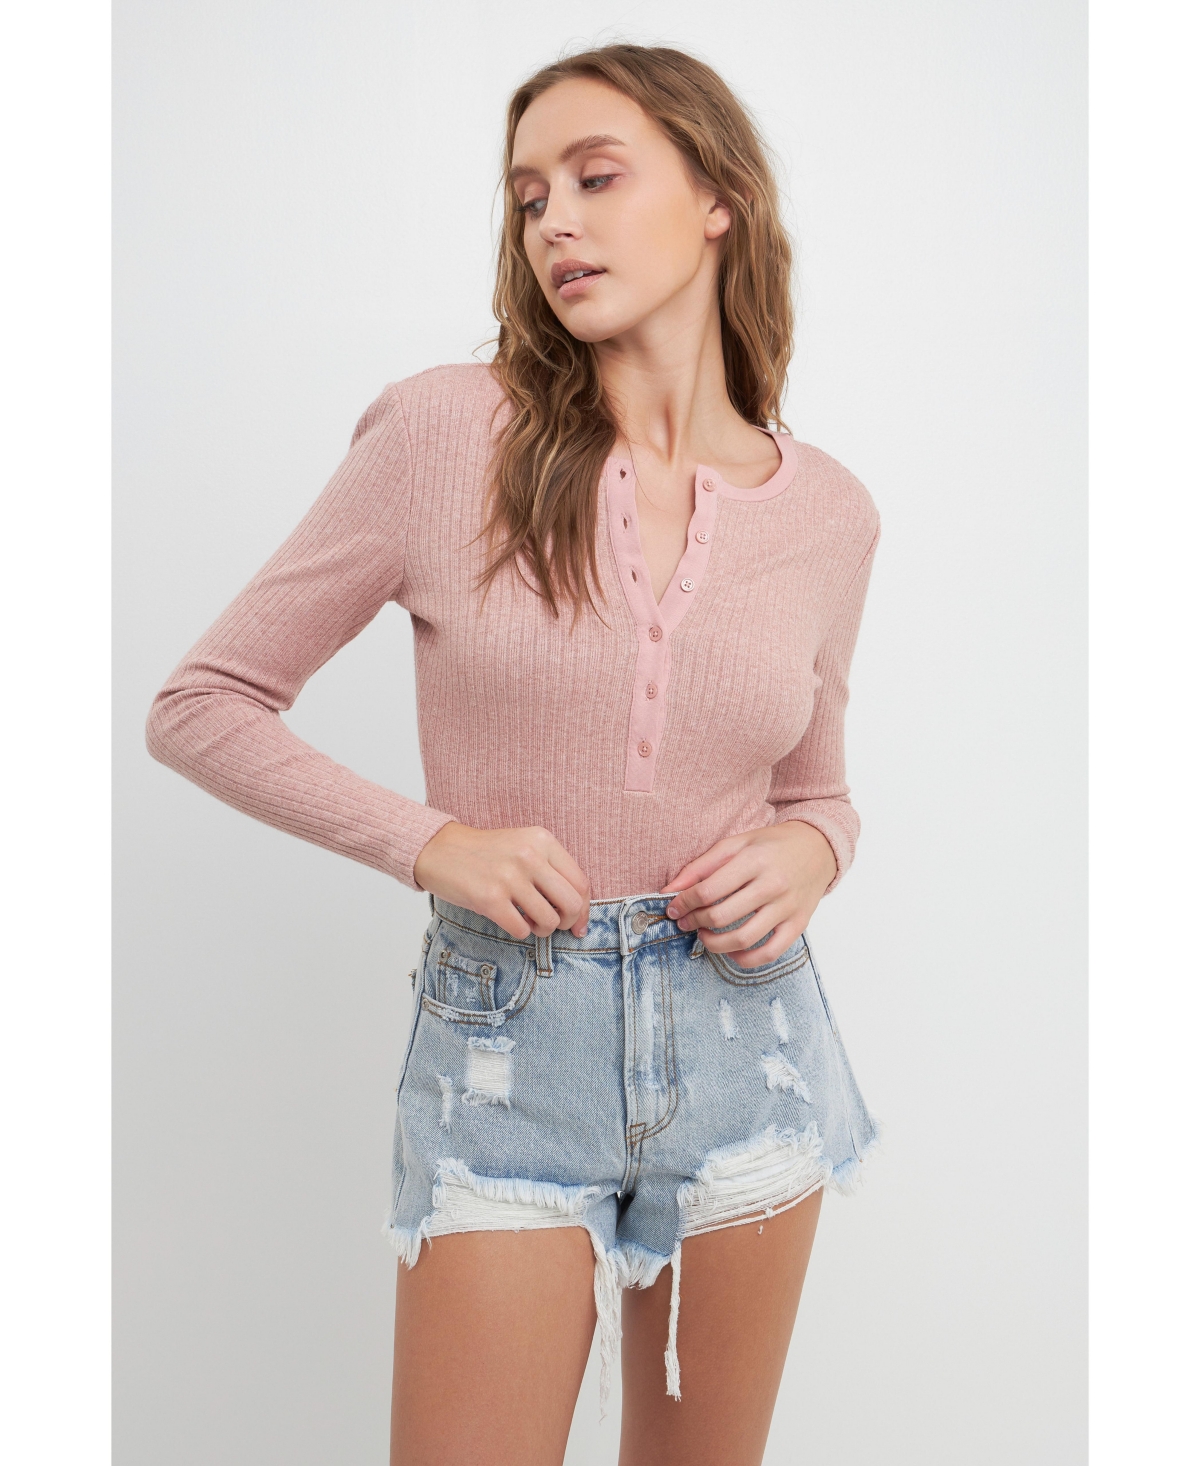 Free The Roses Women's Ribbed Knit Bodysuit